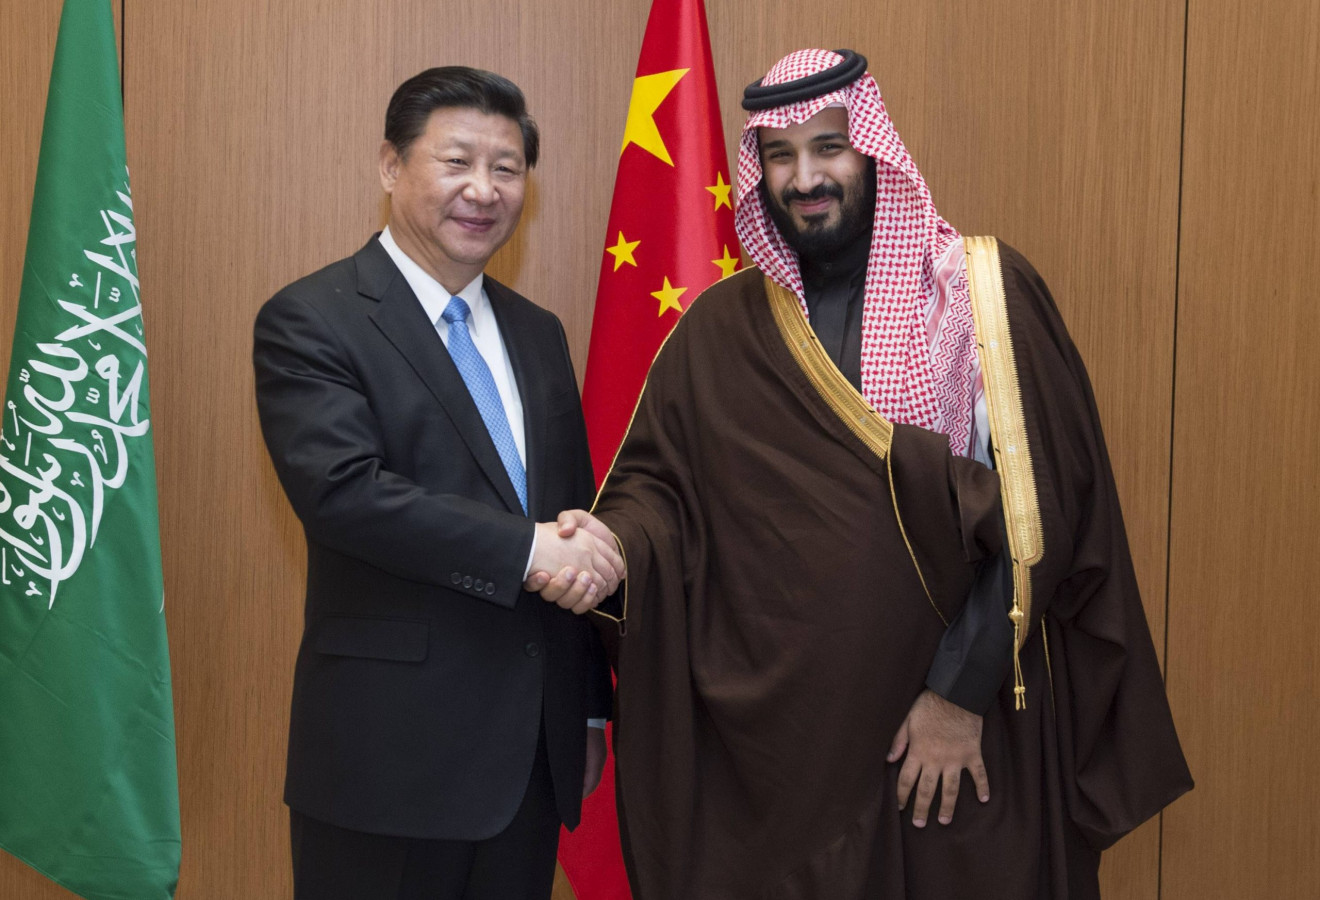 President Xi and Saudi Crown Prince Mohammed (jns.org)